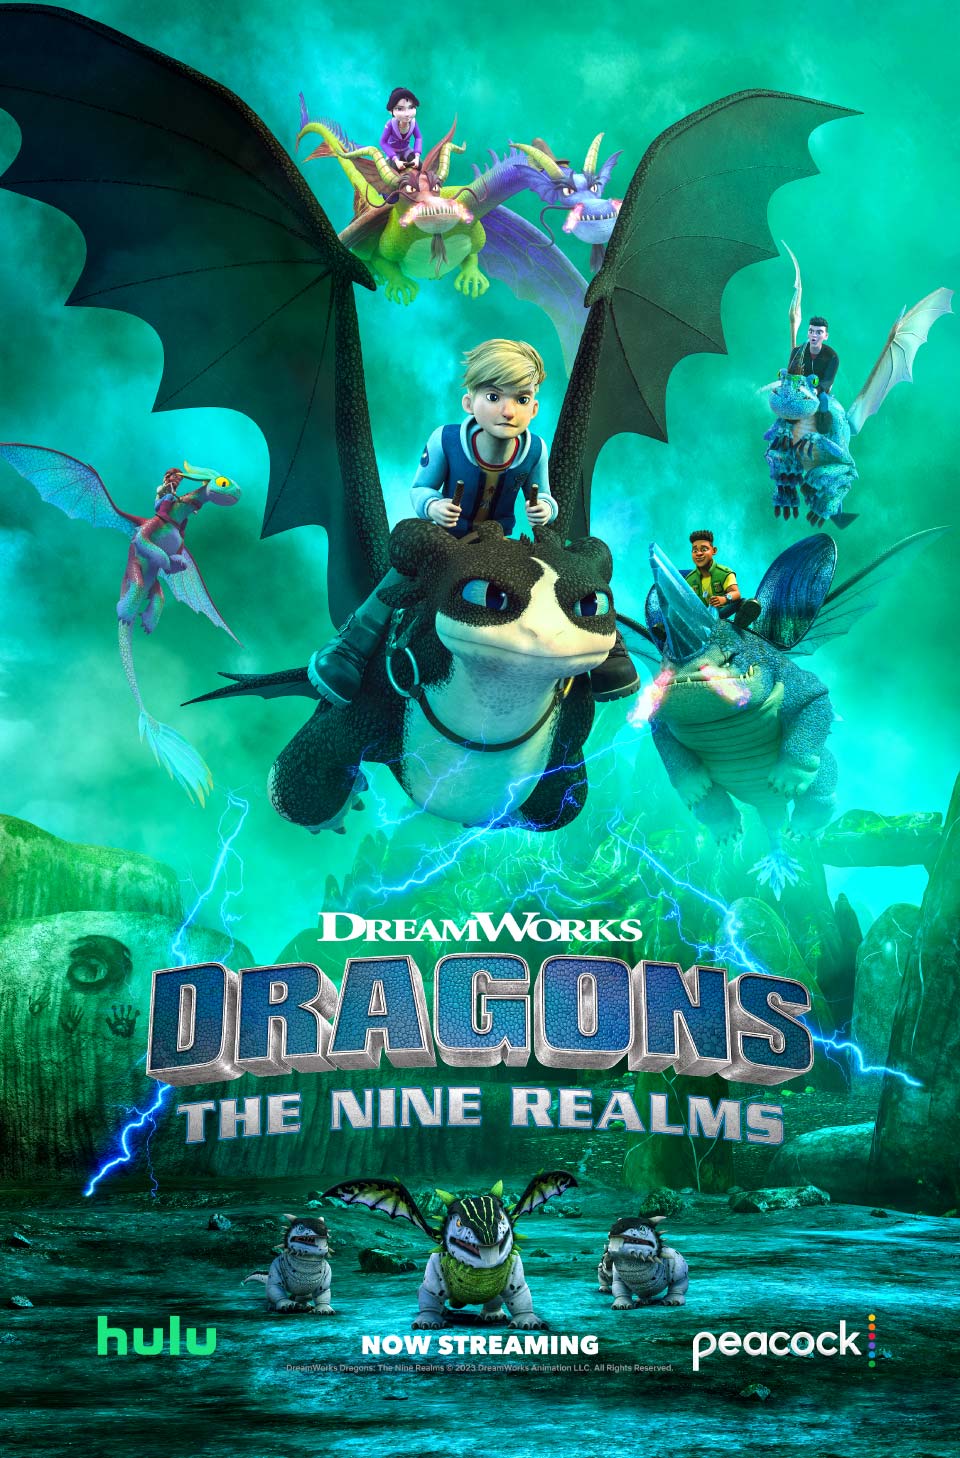 DreamWorks Animation on X: The future of dragons is here in the all-new  animated series, DreamWorks Dragons: The Nine Realms. Coming to @hulu and  @peacockTV on December 23rd. #DreamWorksDragons #DragonsTheNineRealms   /